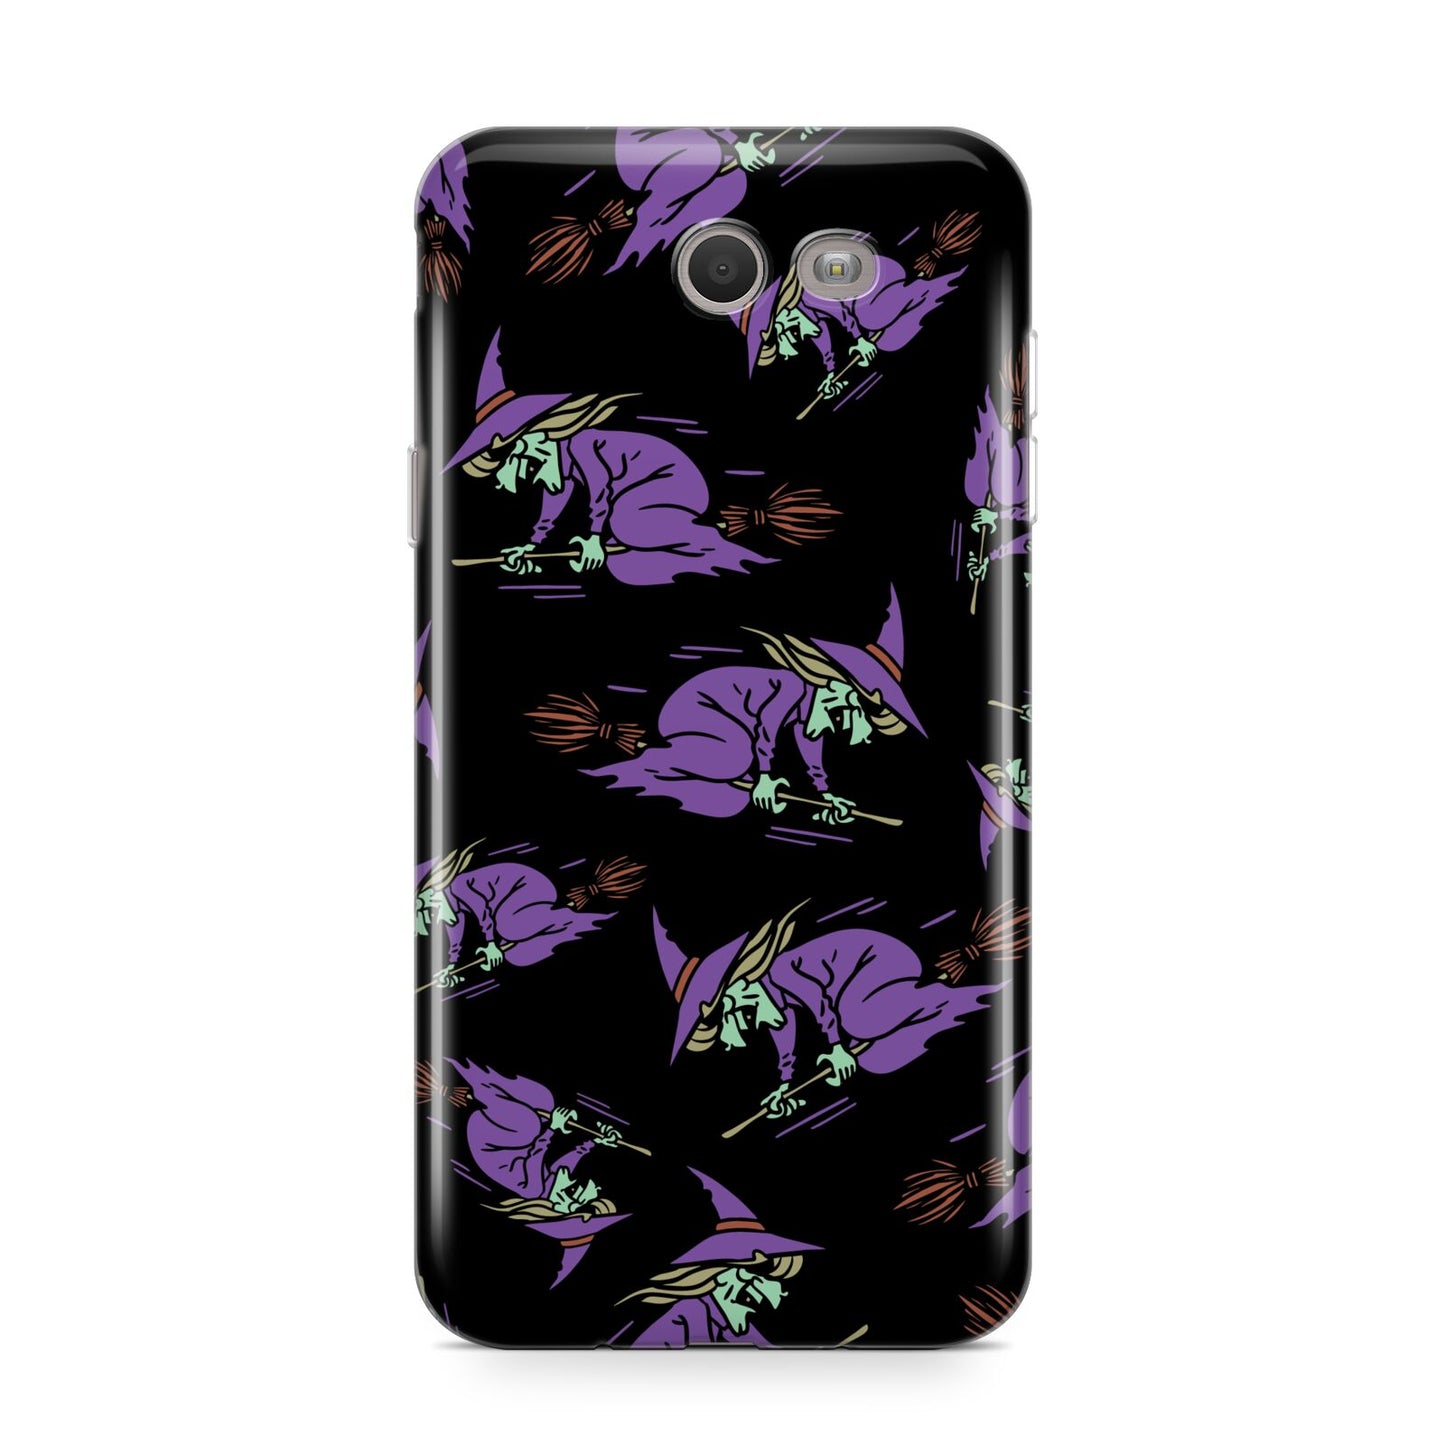 Flying Witches Samsung Galaxy J7 2017 Case